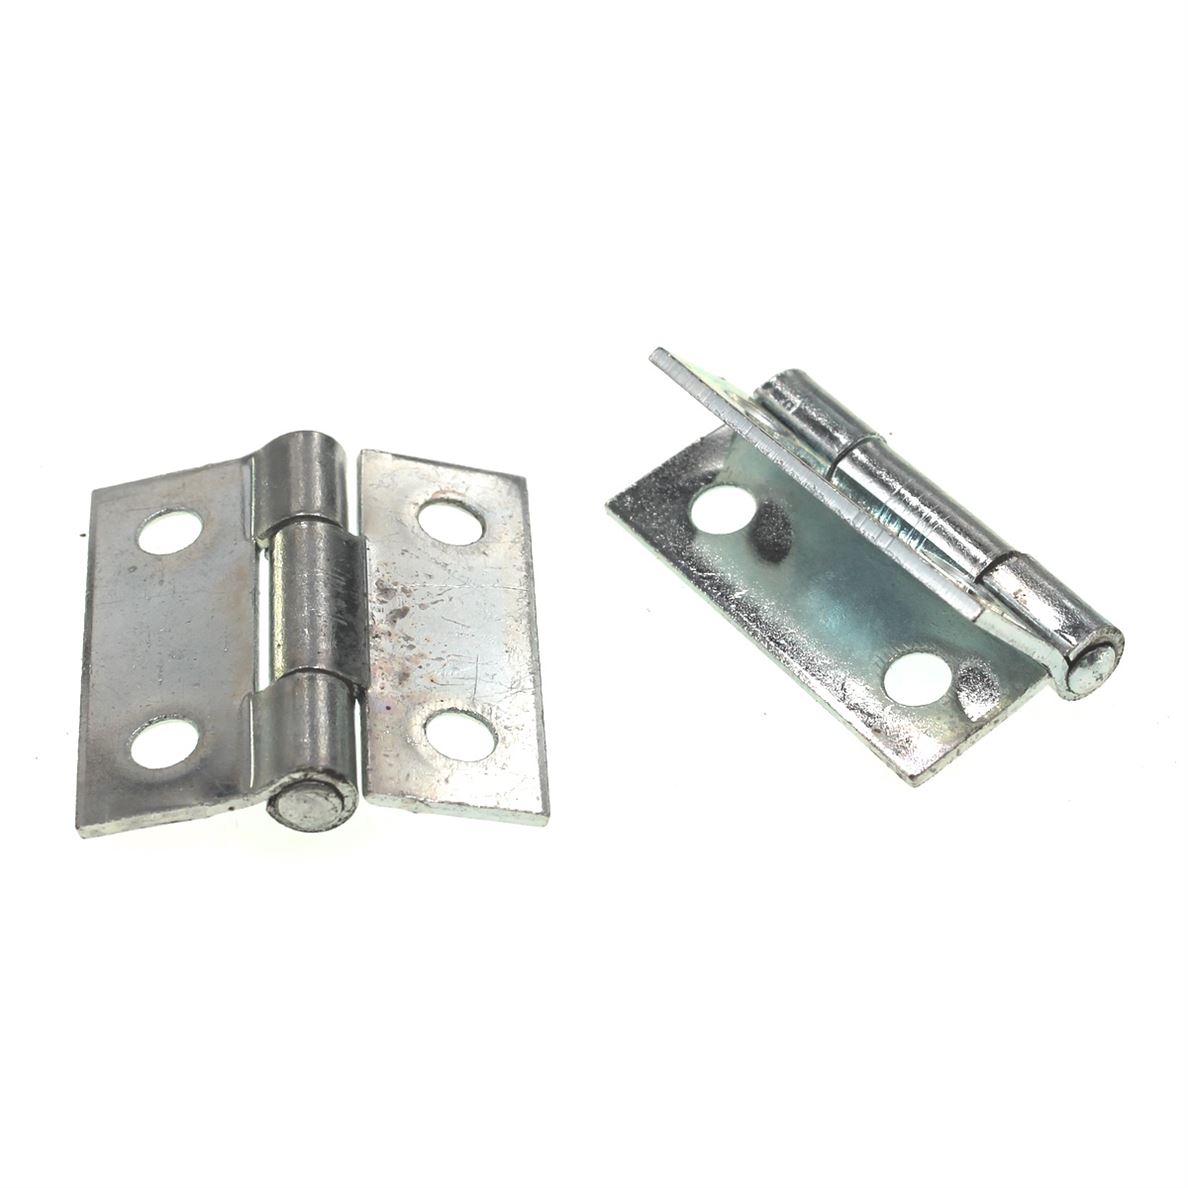 Lawrence Brothers 1 1/2" x 1 3/8" Riveted Pin Narrow Hinges 2 Pack D810S-ZN